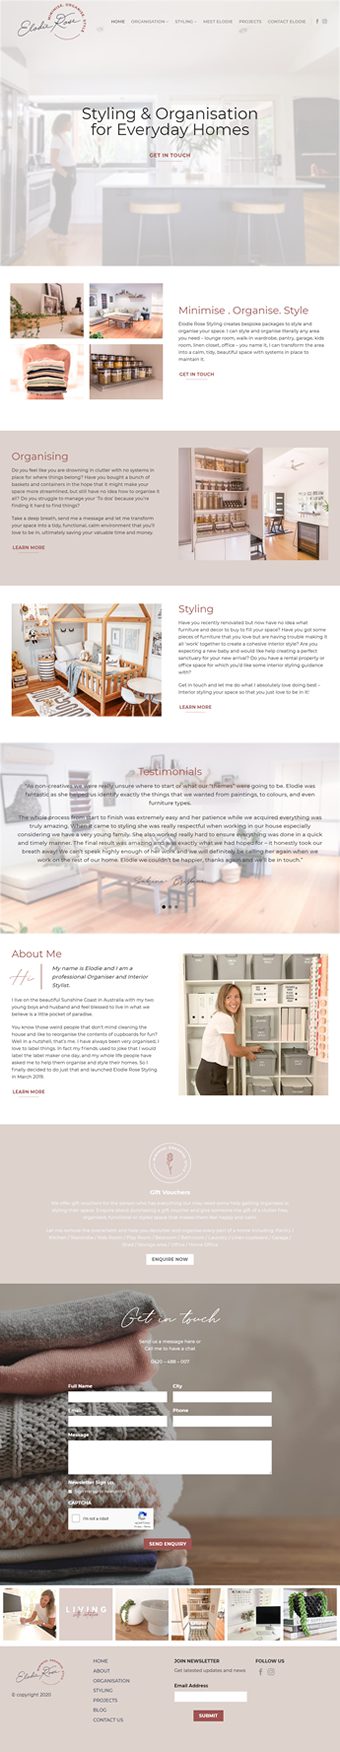 Our Work Hospitality Tourism Website Design Elodie Rose Styling